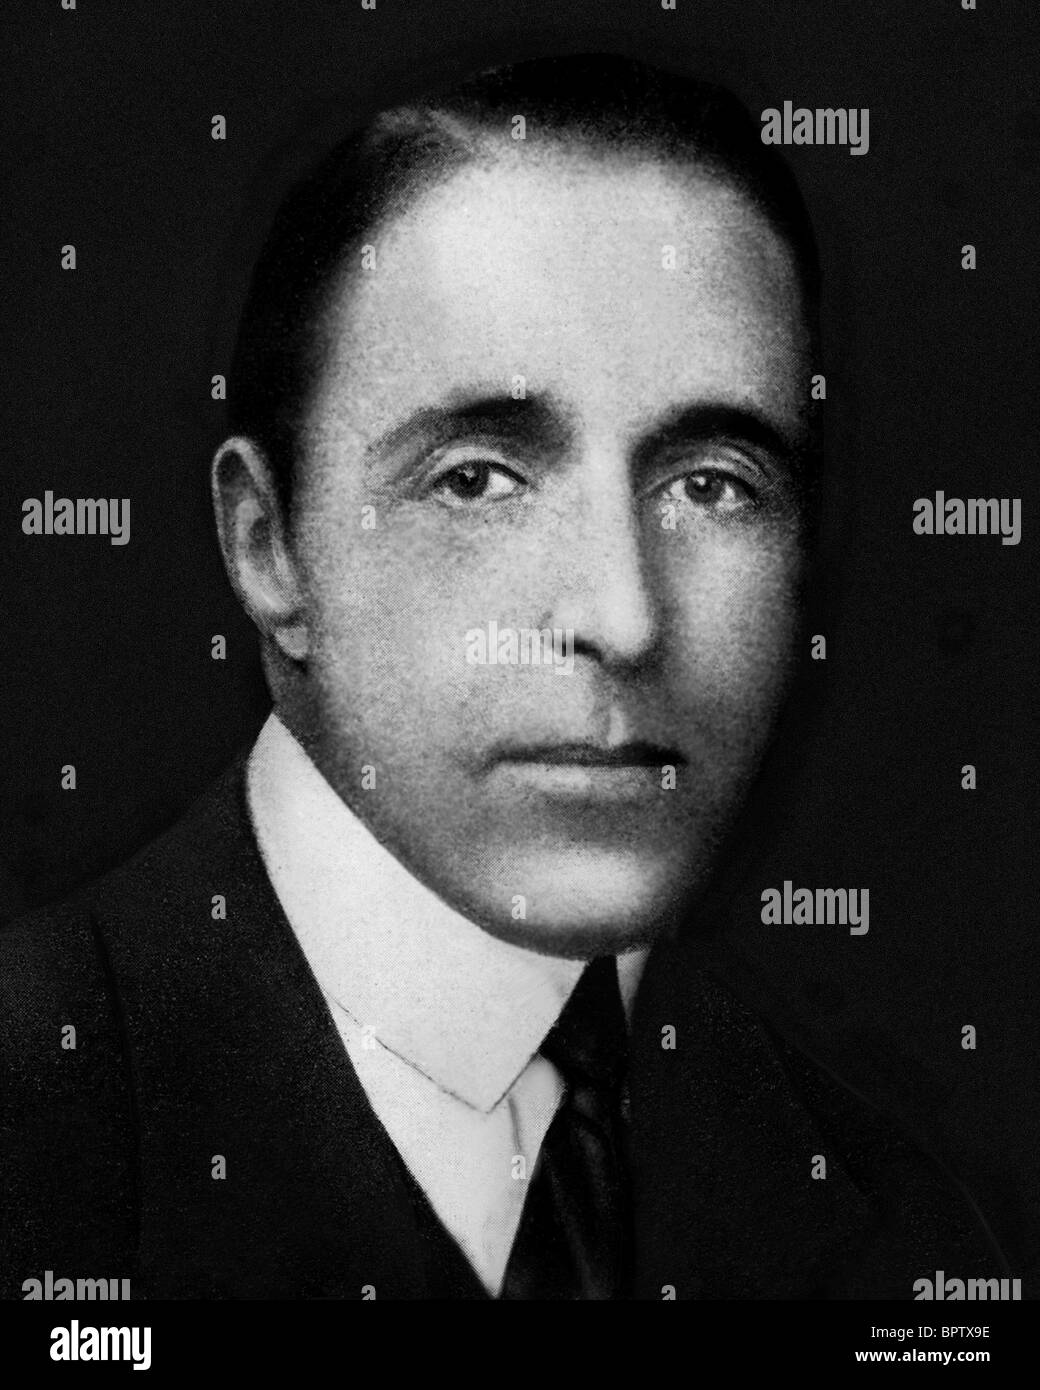 D.W. GRIFFITH FILM DIRECTOR (1905) Stock Photo